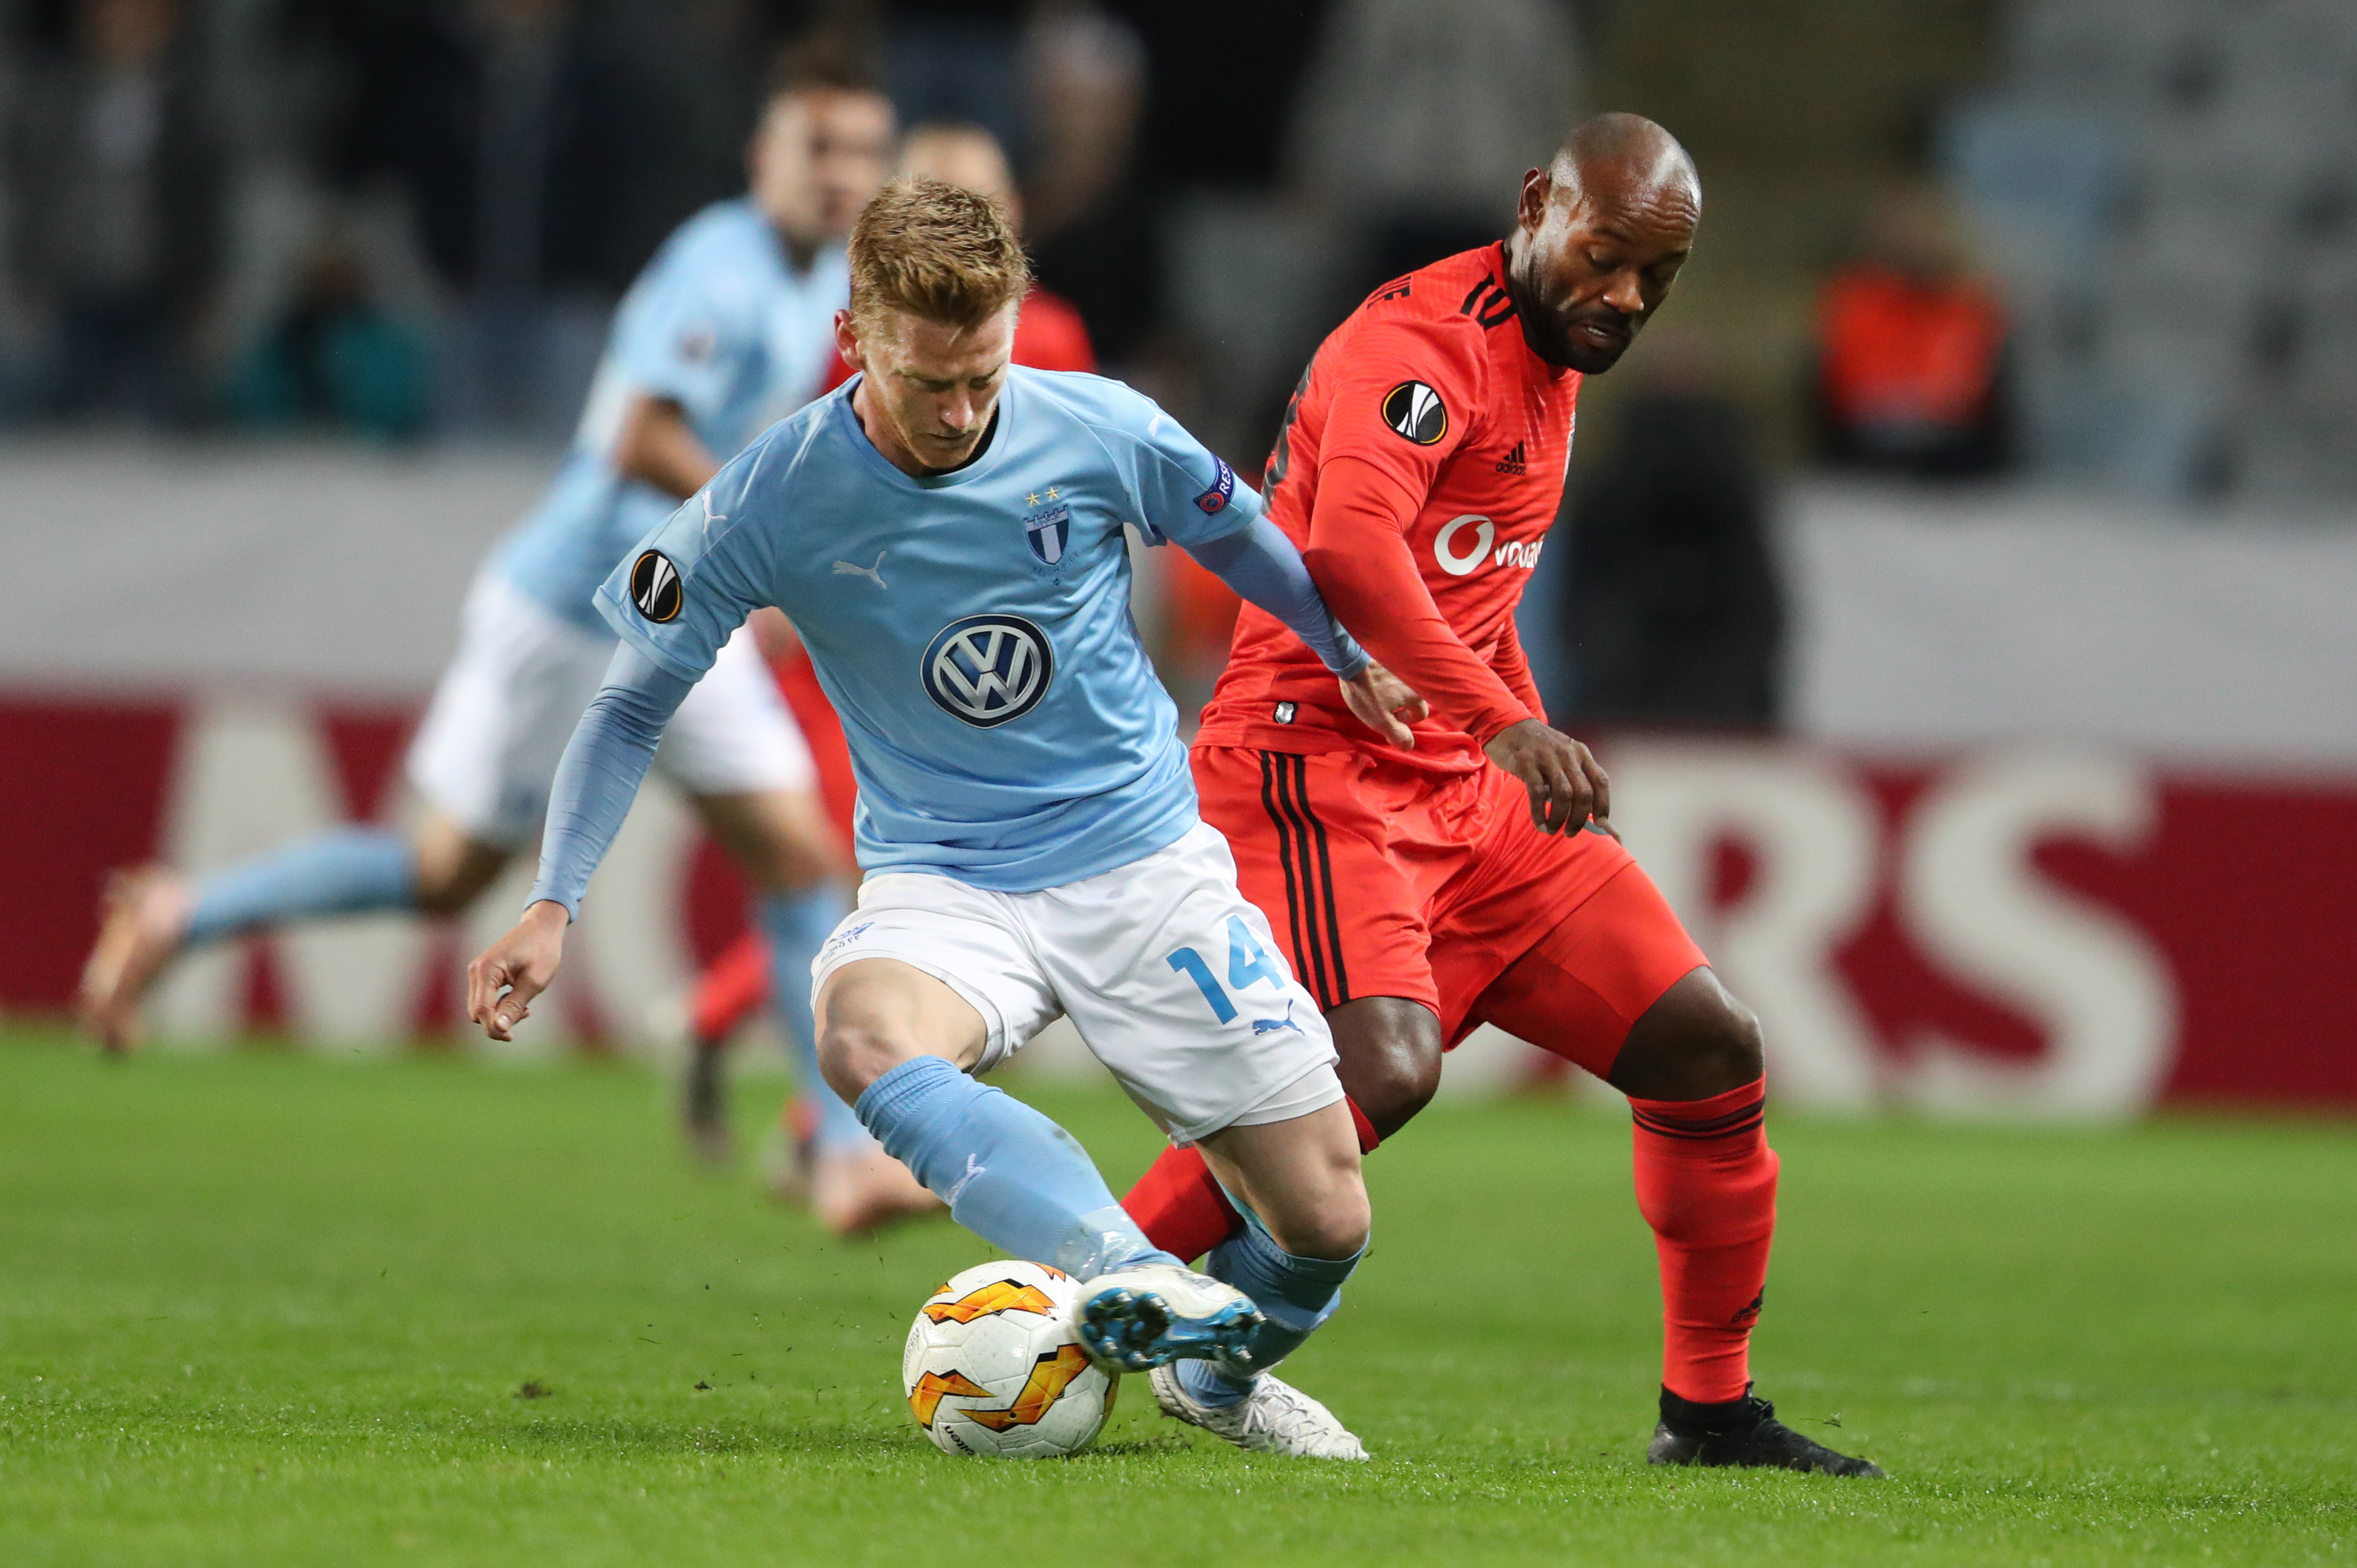 Anders Christiansen takes the ball from Besikta’s Vagner Love - Malmo - Champions League